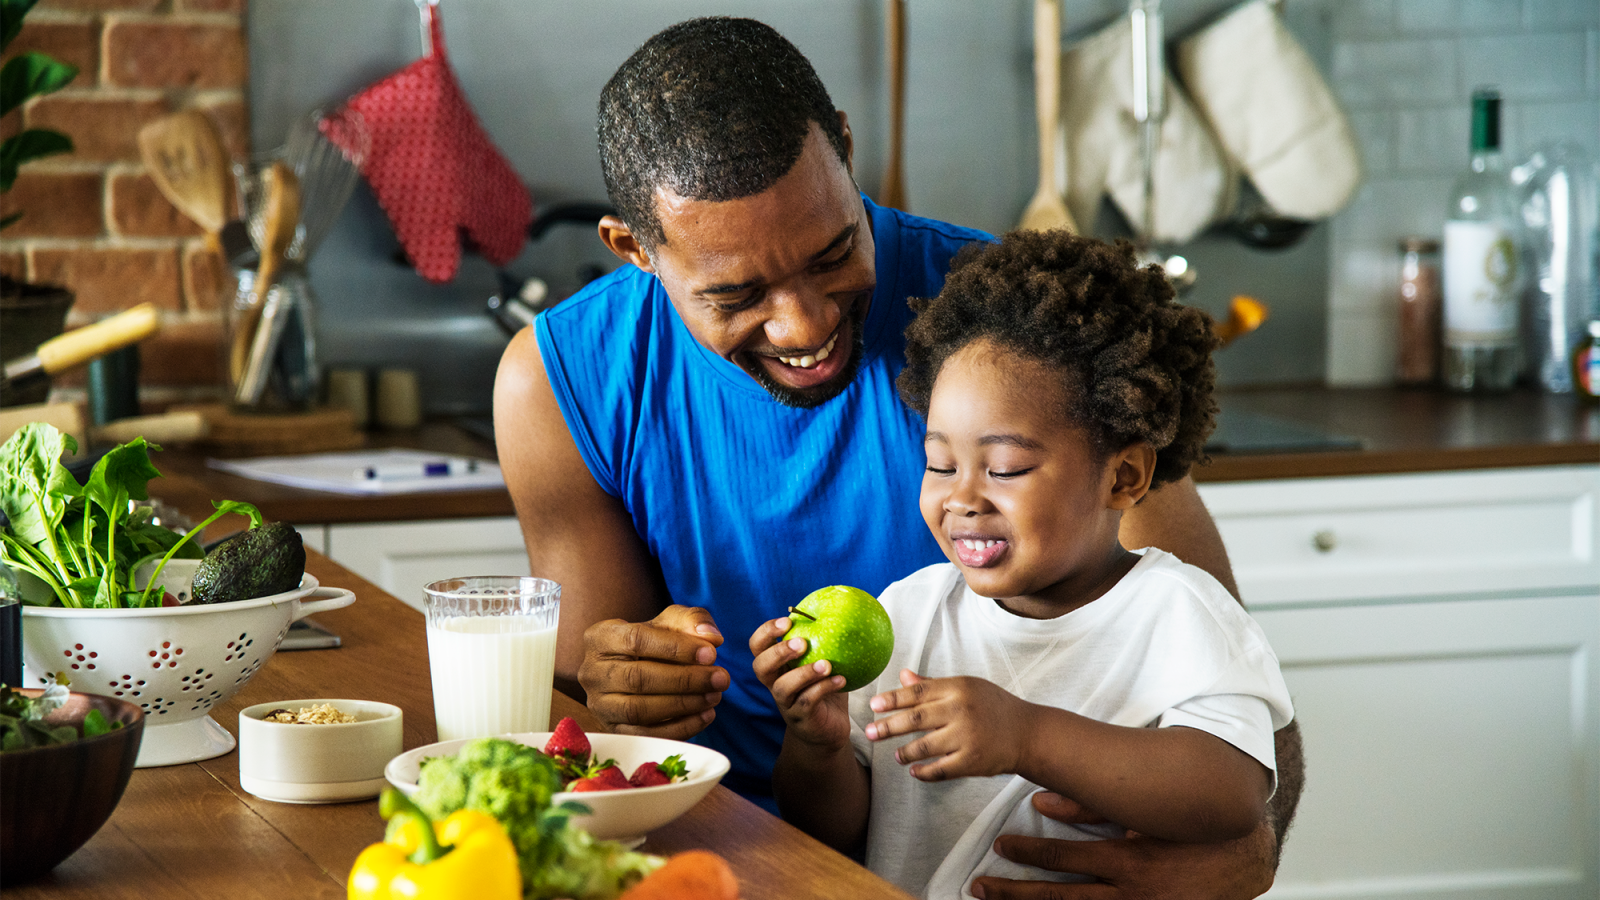 A father feeds his child fresh fruit as they both sit at the kitchen table.